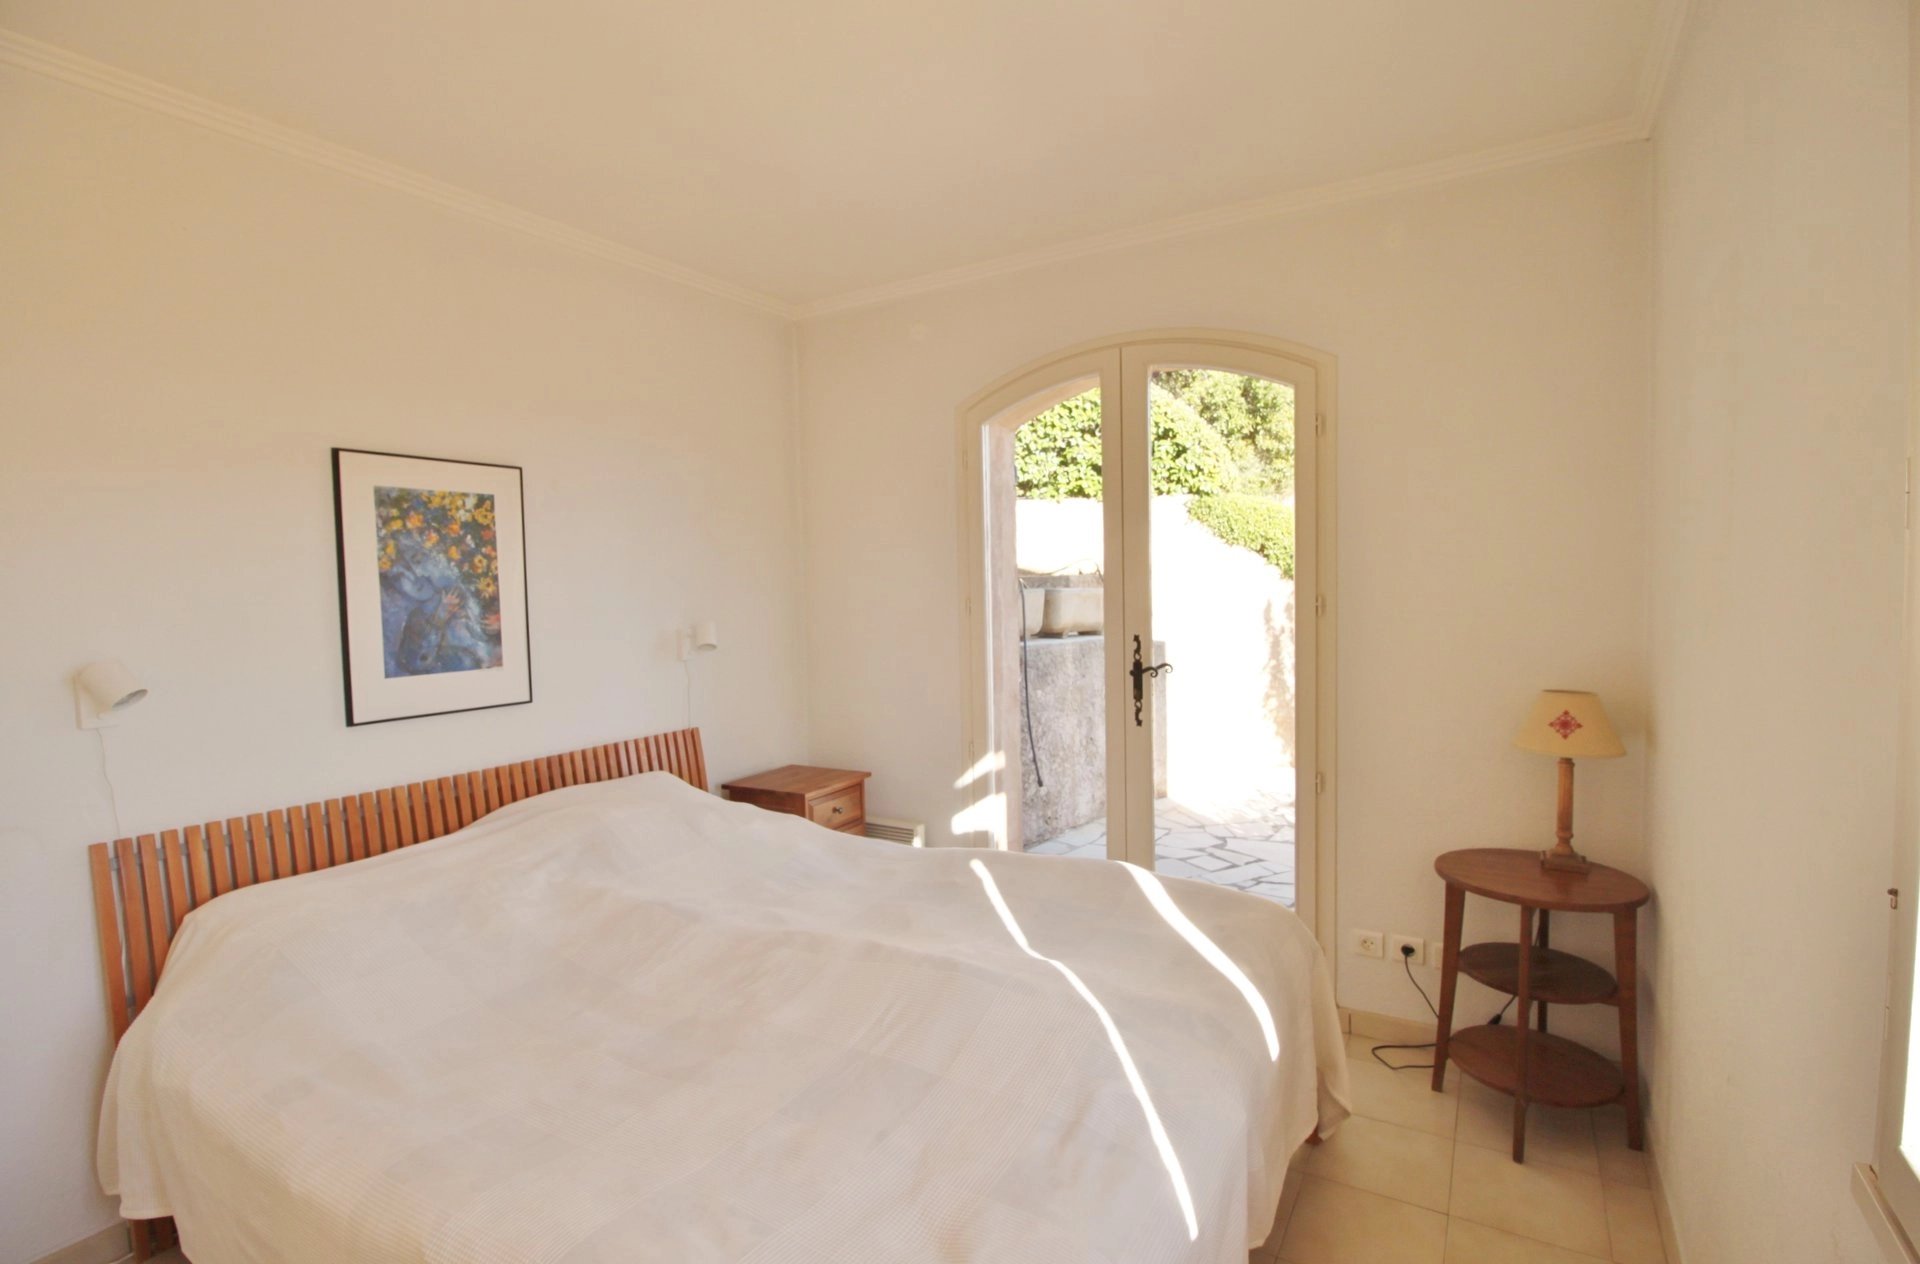 Cozy villa with panoramic view at walking distance from the village